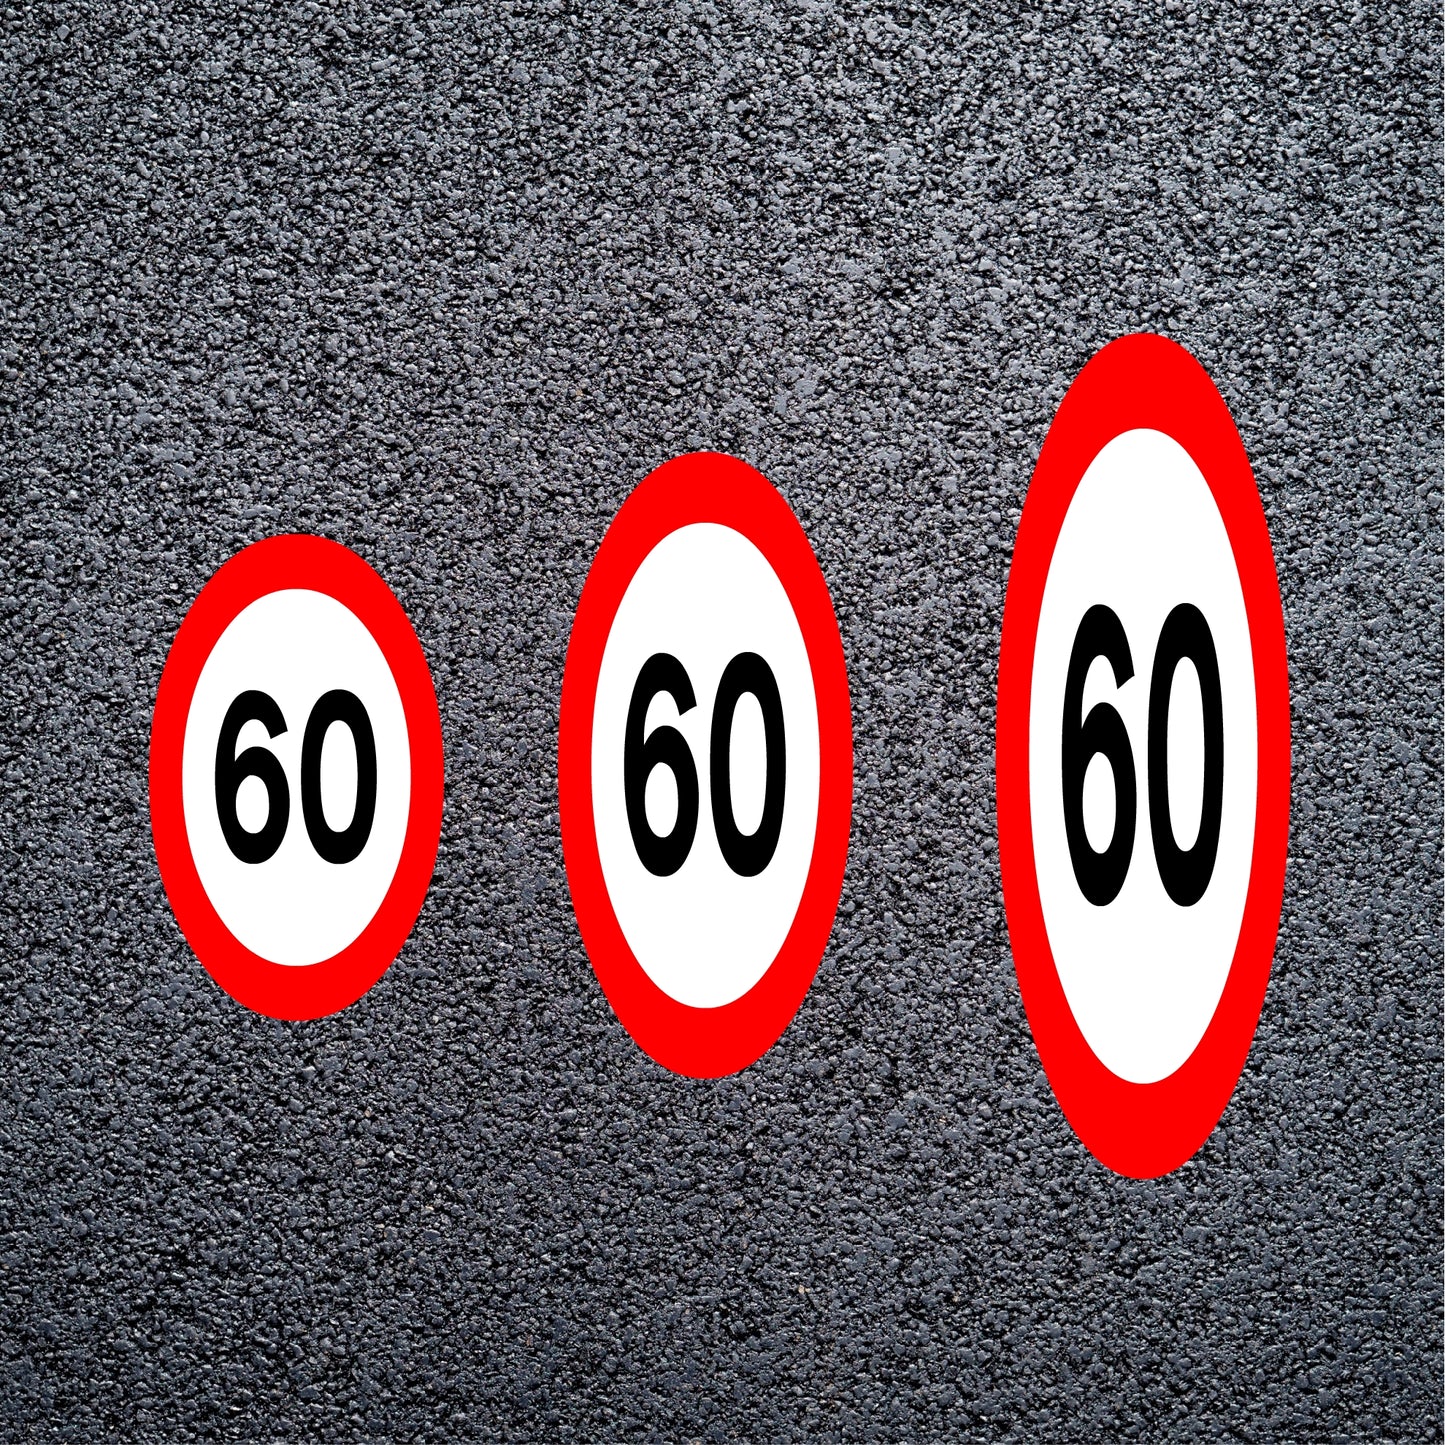 60 Mph Speed Limit Roudel Floor Signs